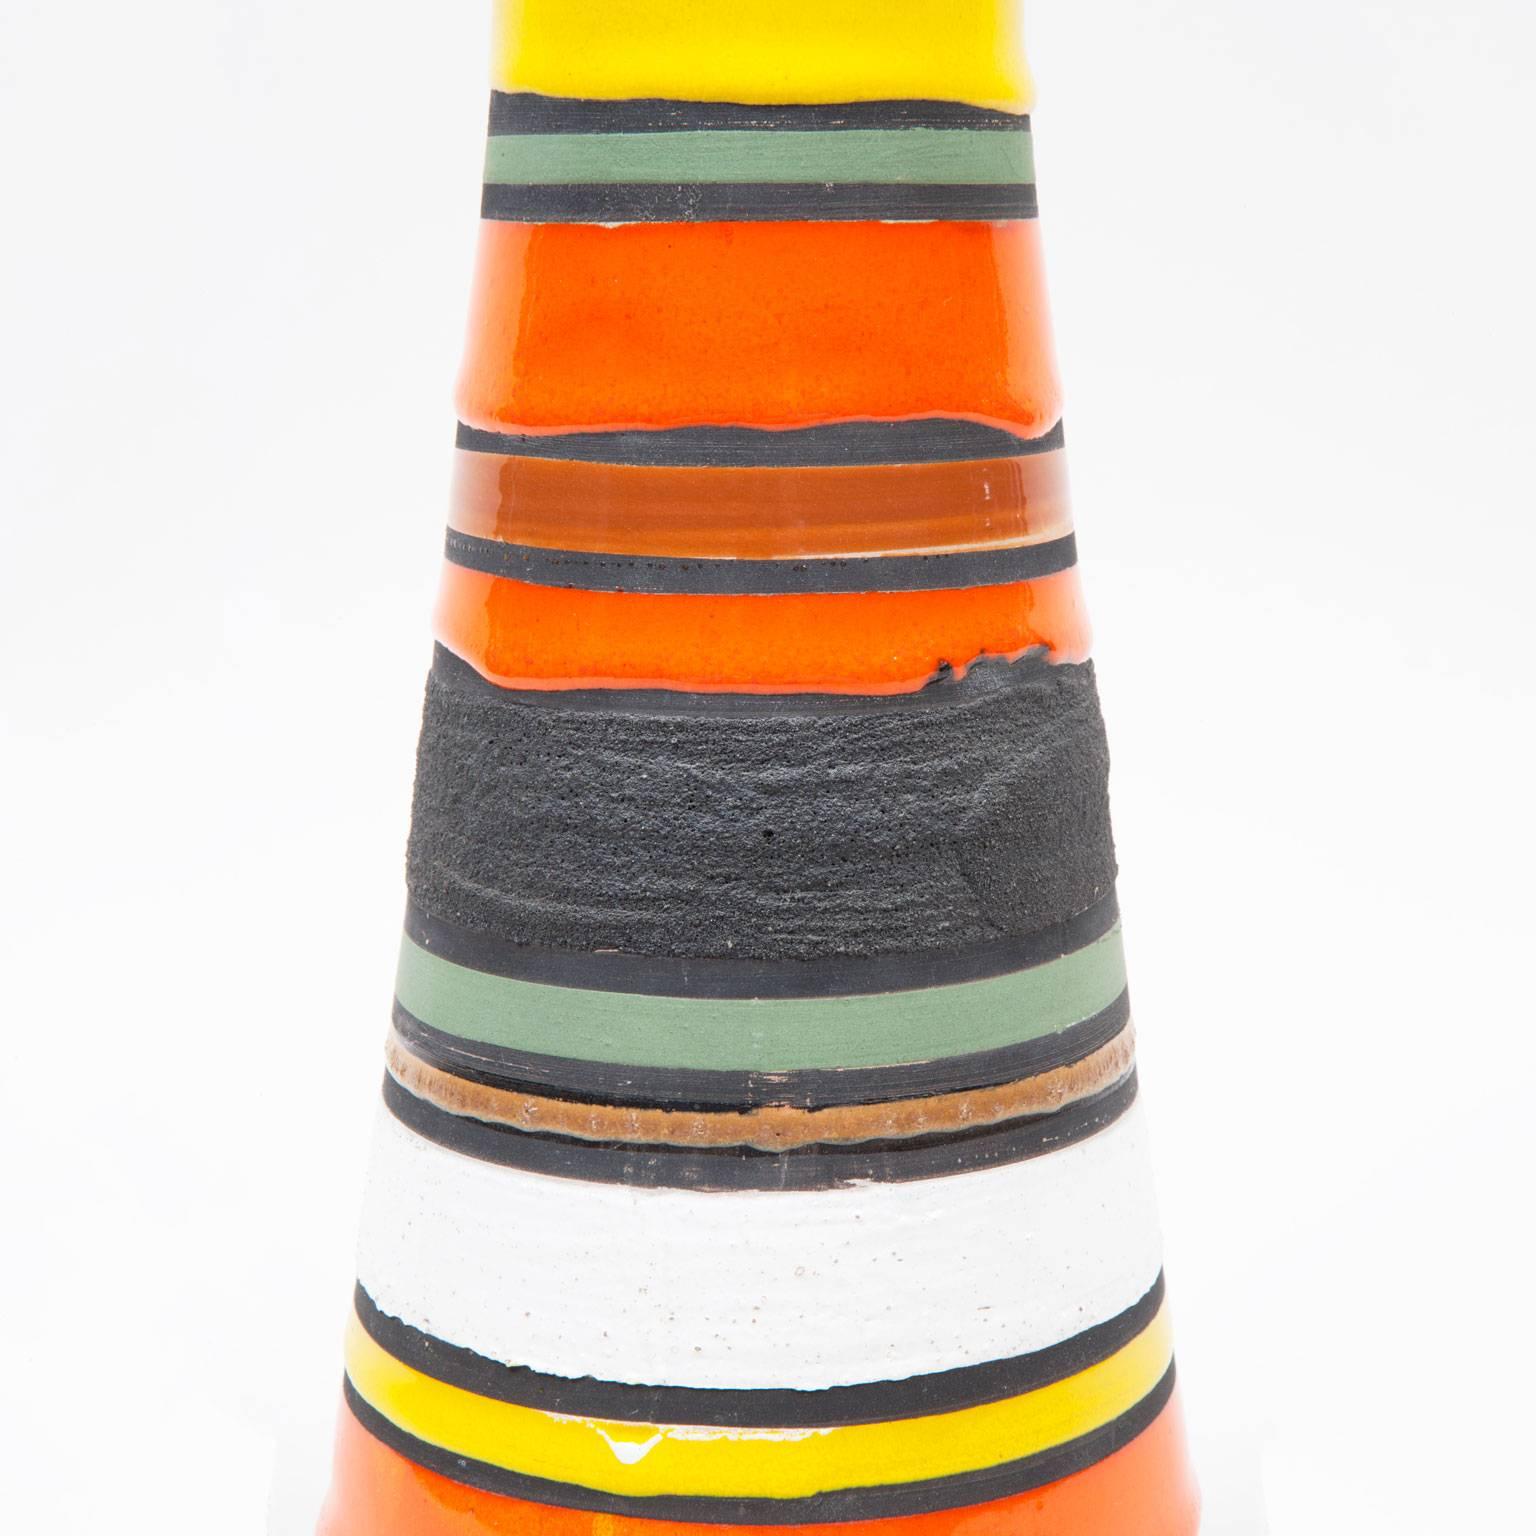 Large striped ceramic vase designed by Aldo Londi and produced by Bitossi for Raymor.